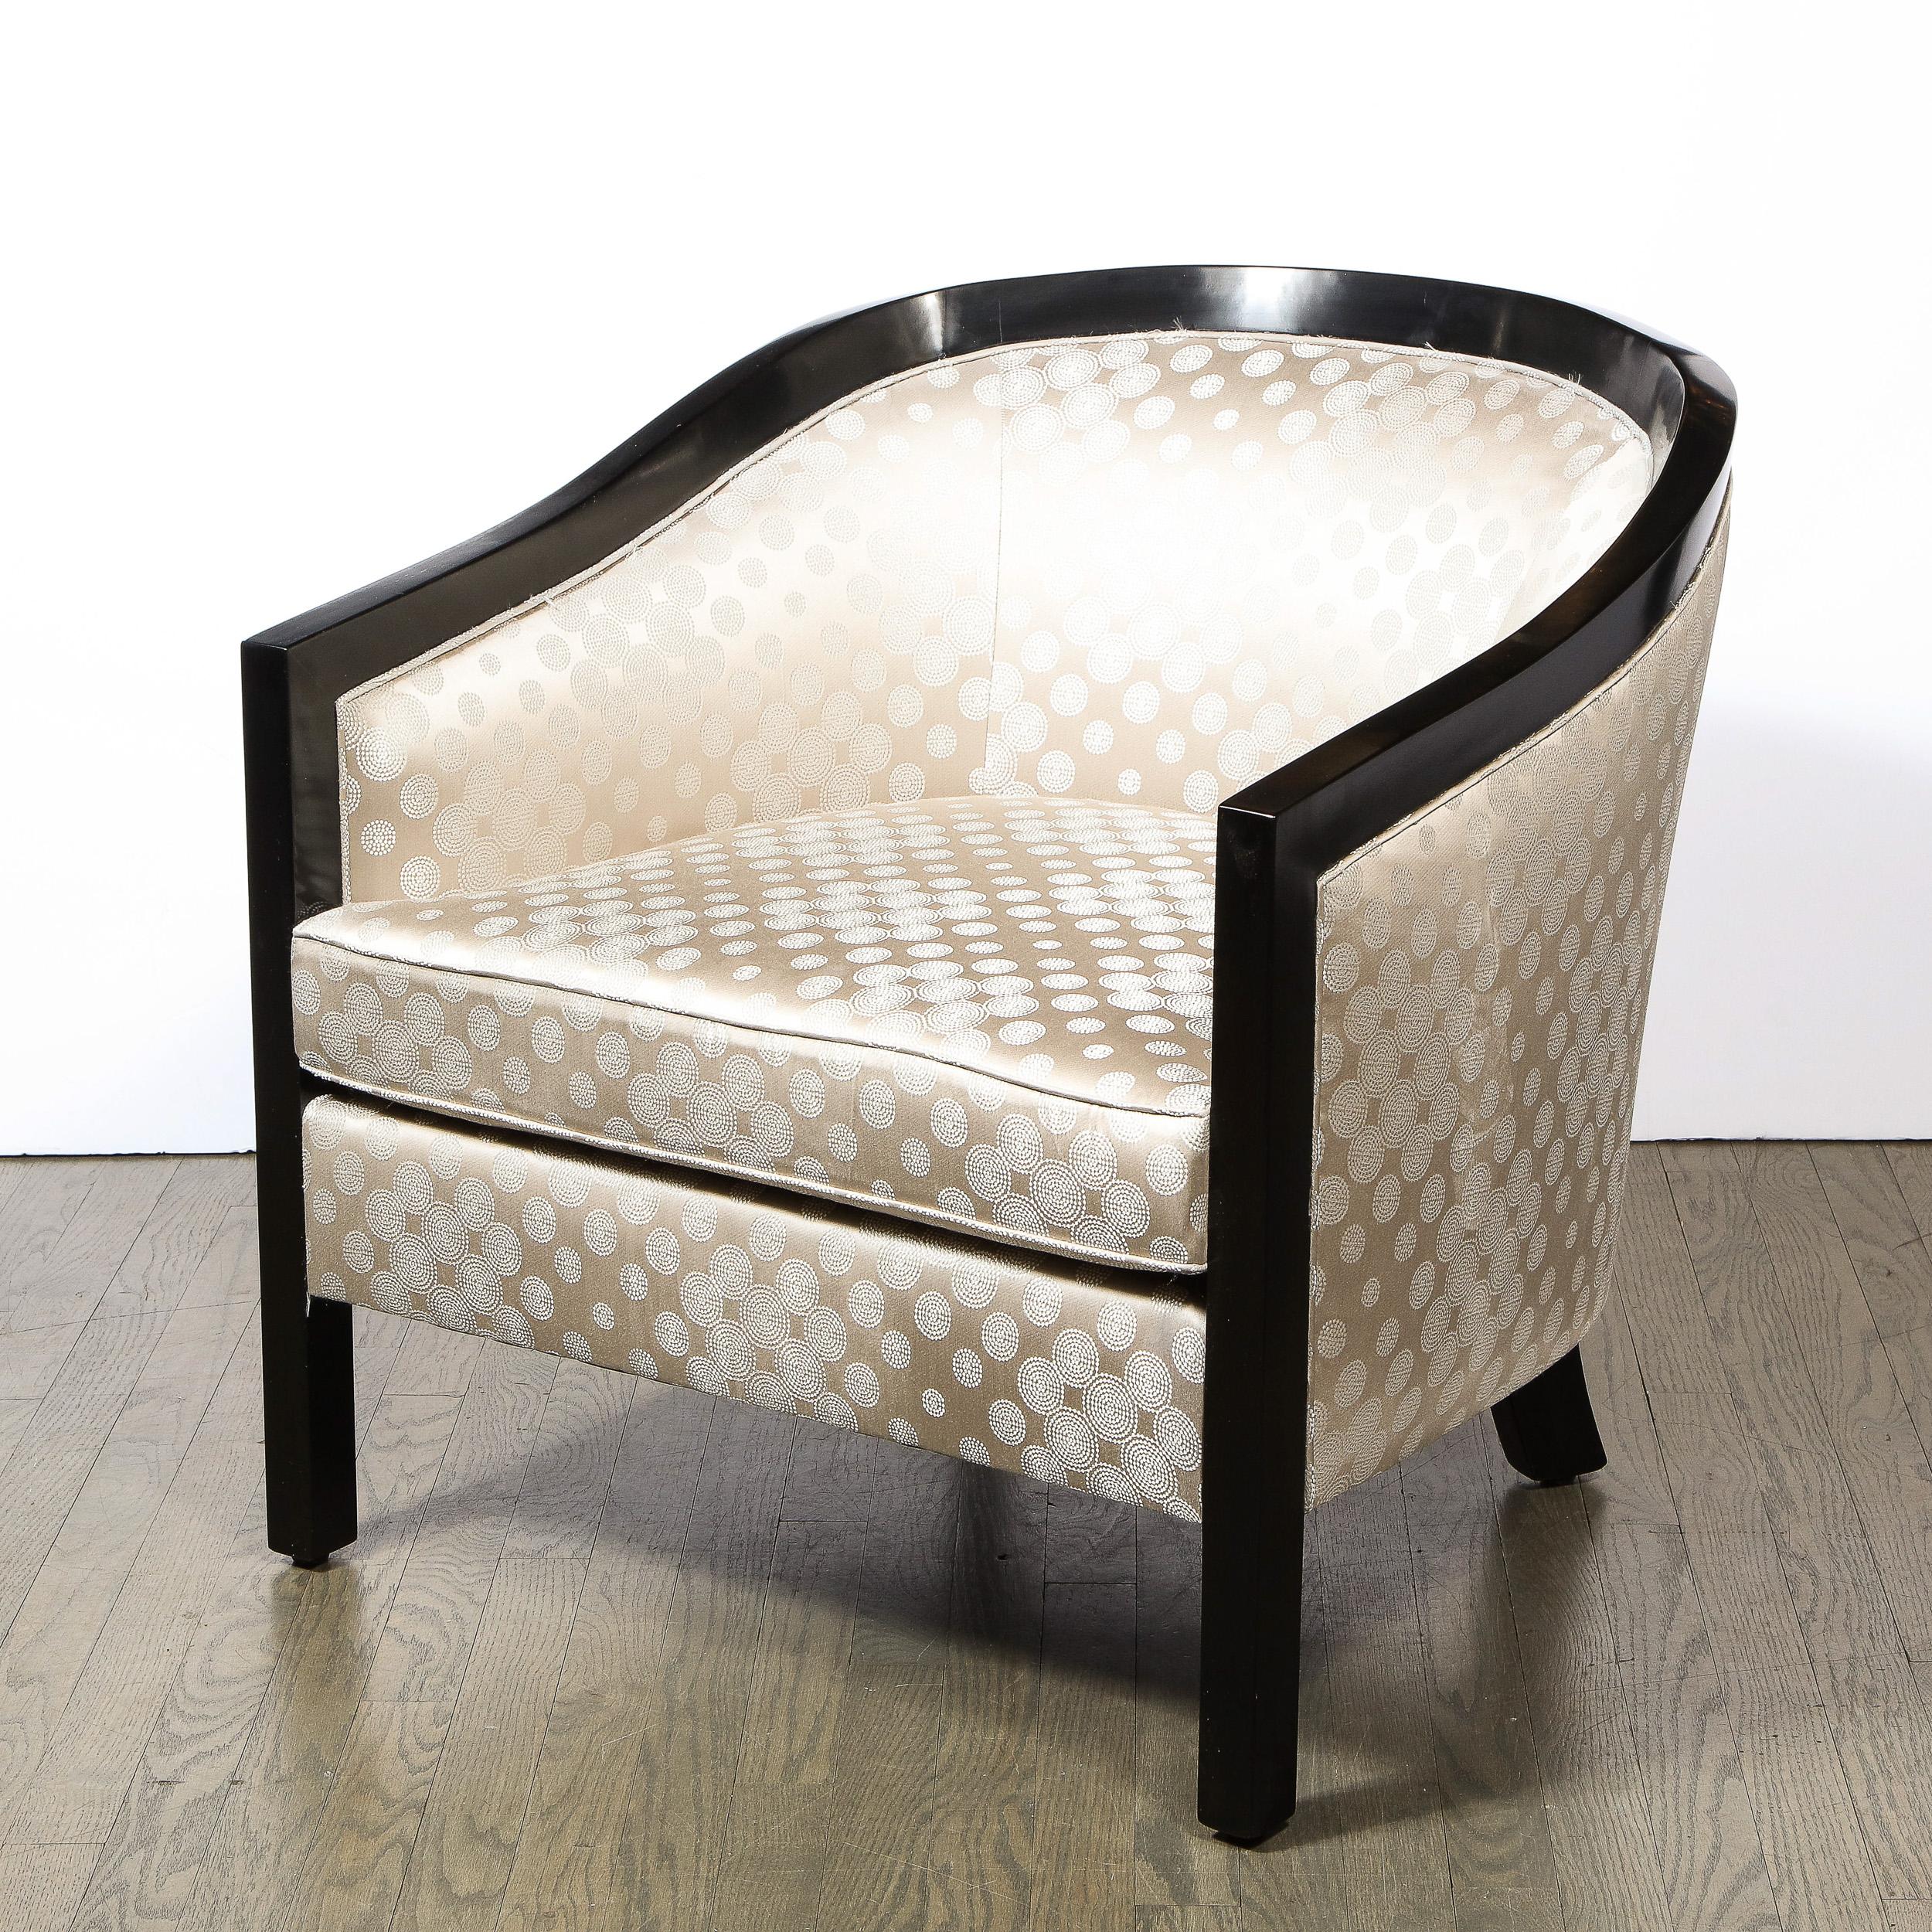 American Mid-Century Modern Black Lacquer & Platinum Silk Barrel Back Chair by James Mont